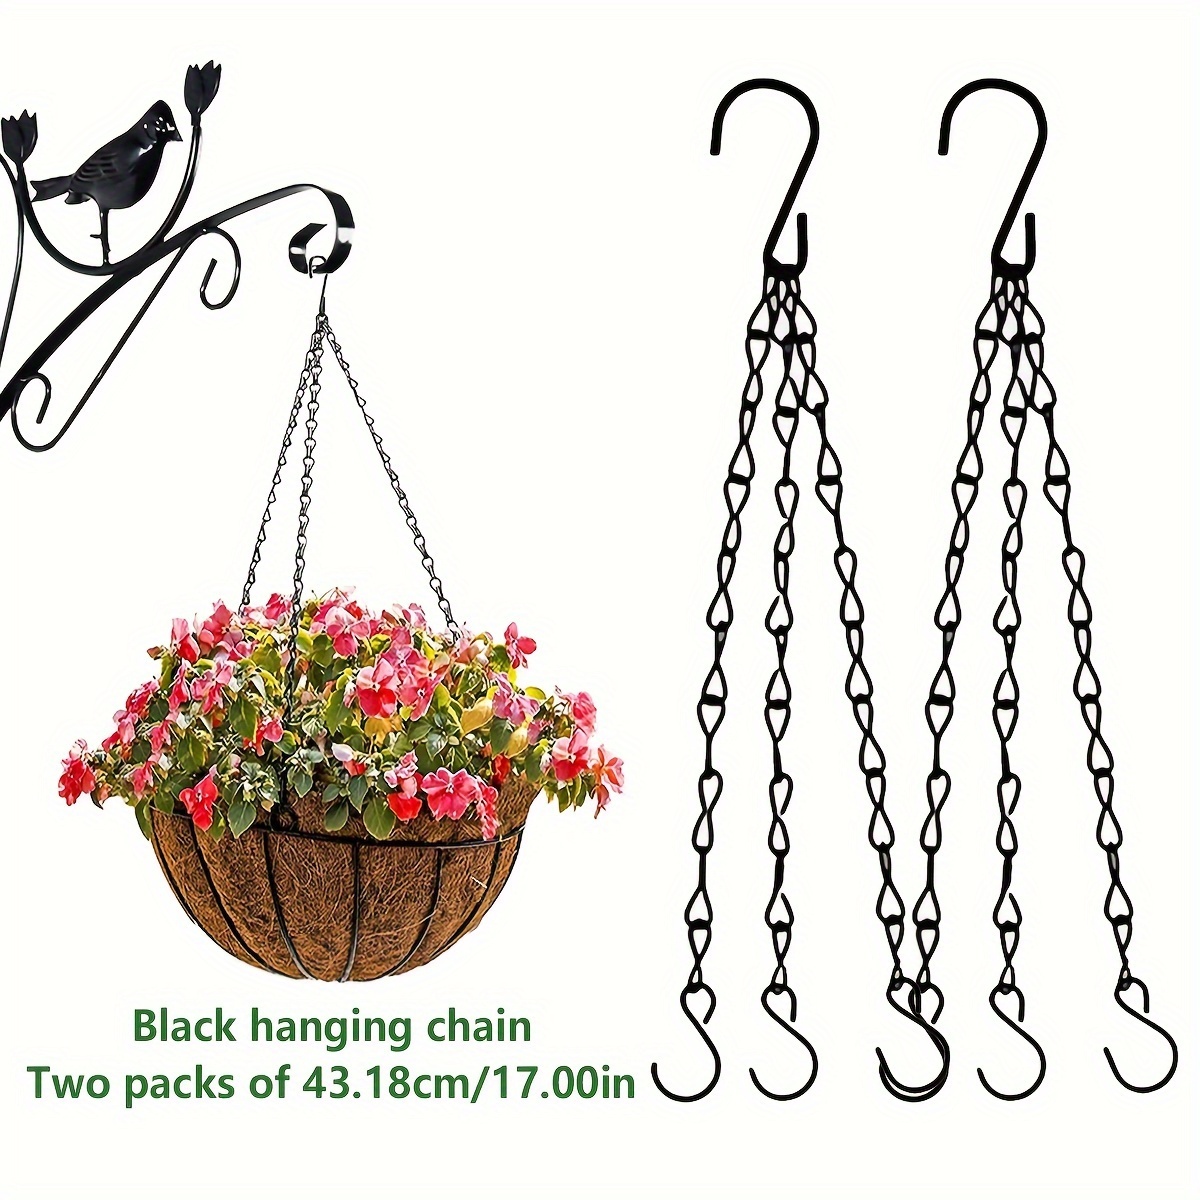 

2pcs Black Metal Hanging Chains With S-hooks, Contemporary Style, Rust-proof And Durable For Outdoor And Indoor Plant Baskets, Bird Feeders, Lanterns, And Wind Chimes Decor